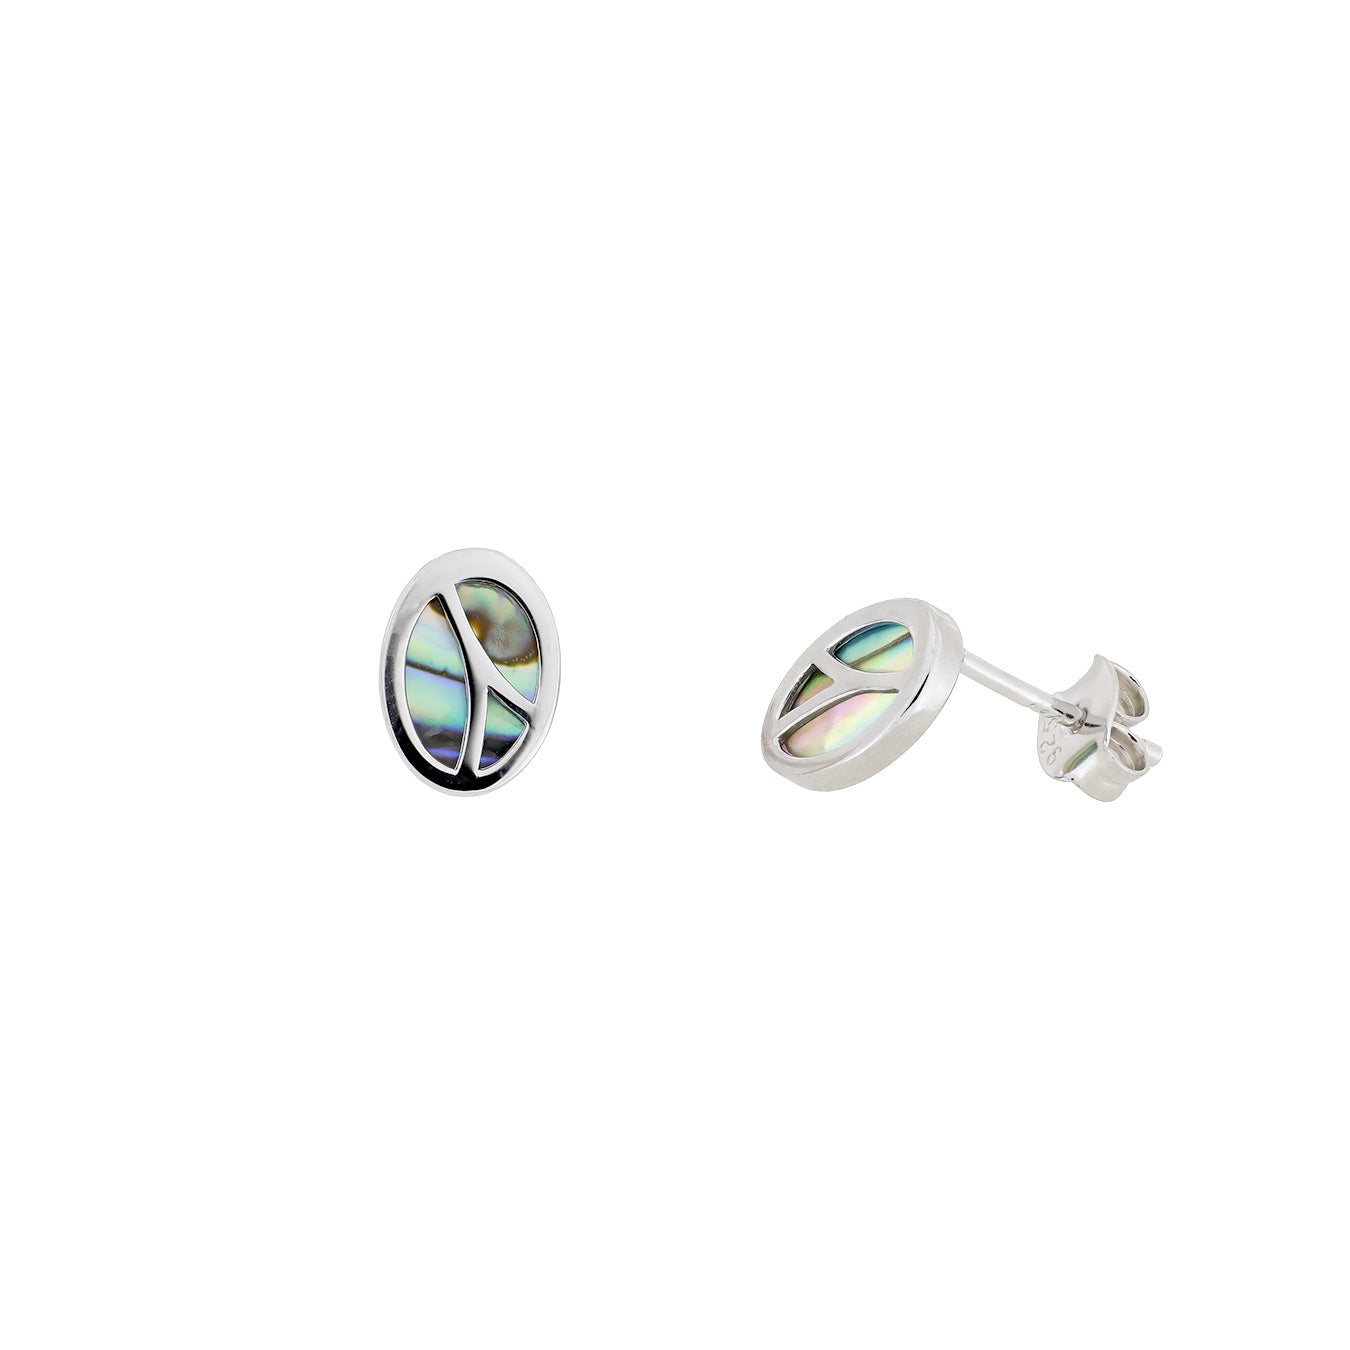 Abalone Oval Silver Curves Stud Earrings